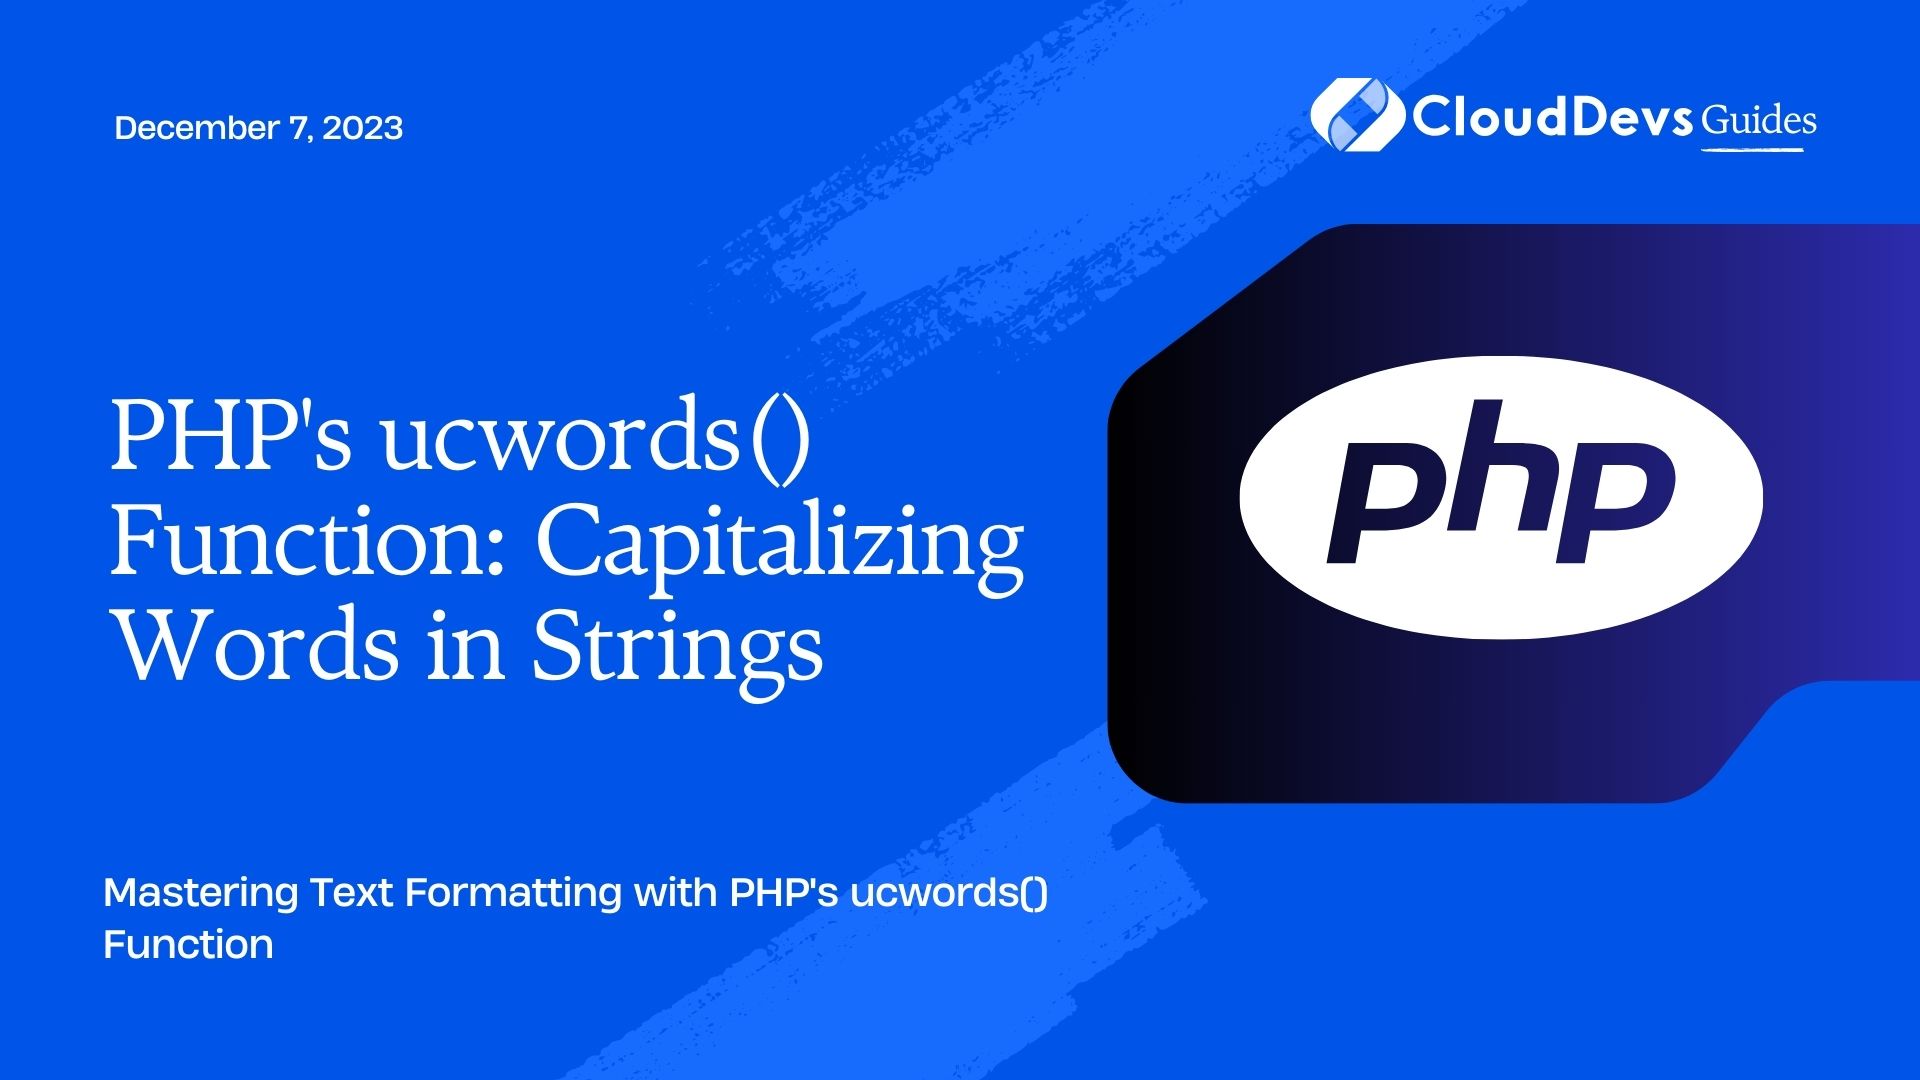 PHP's ucwords() Function: Capitalizing Words in Strings